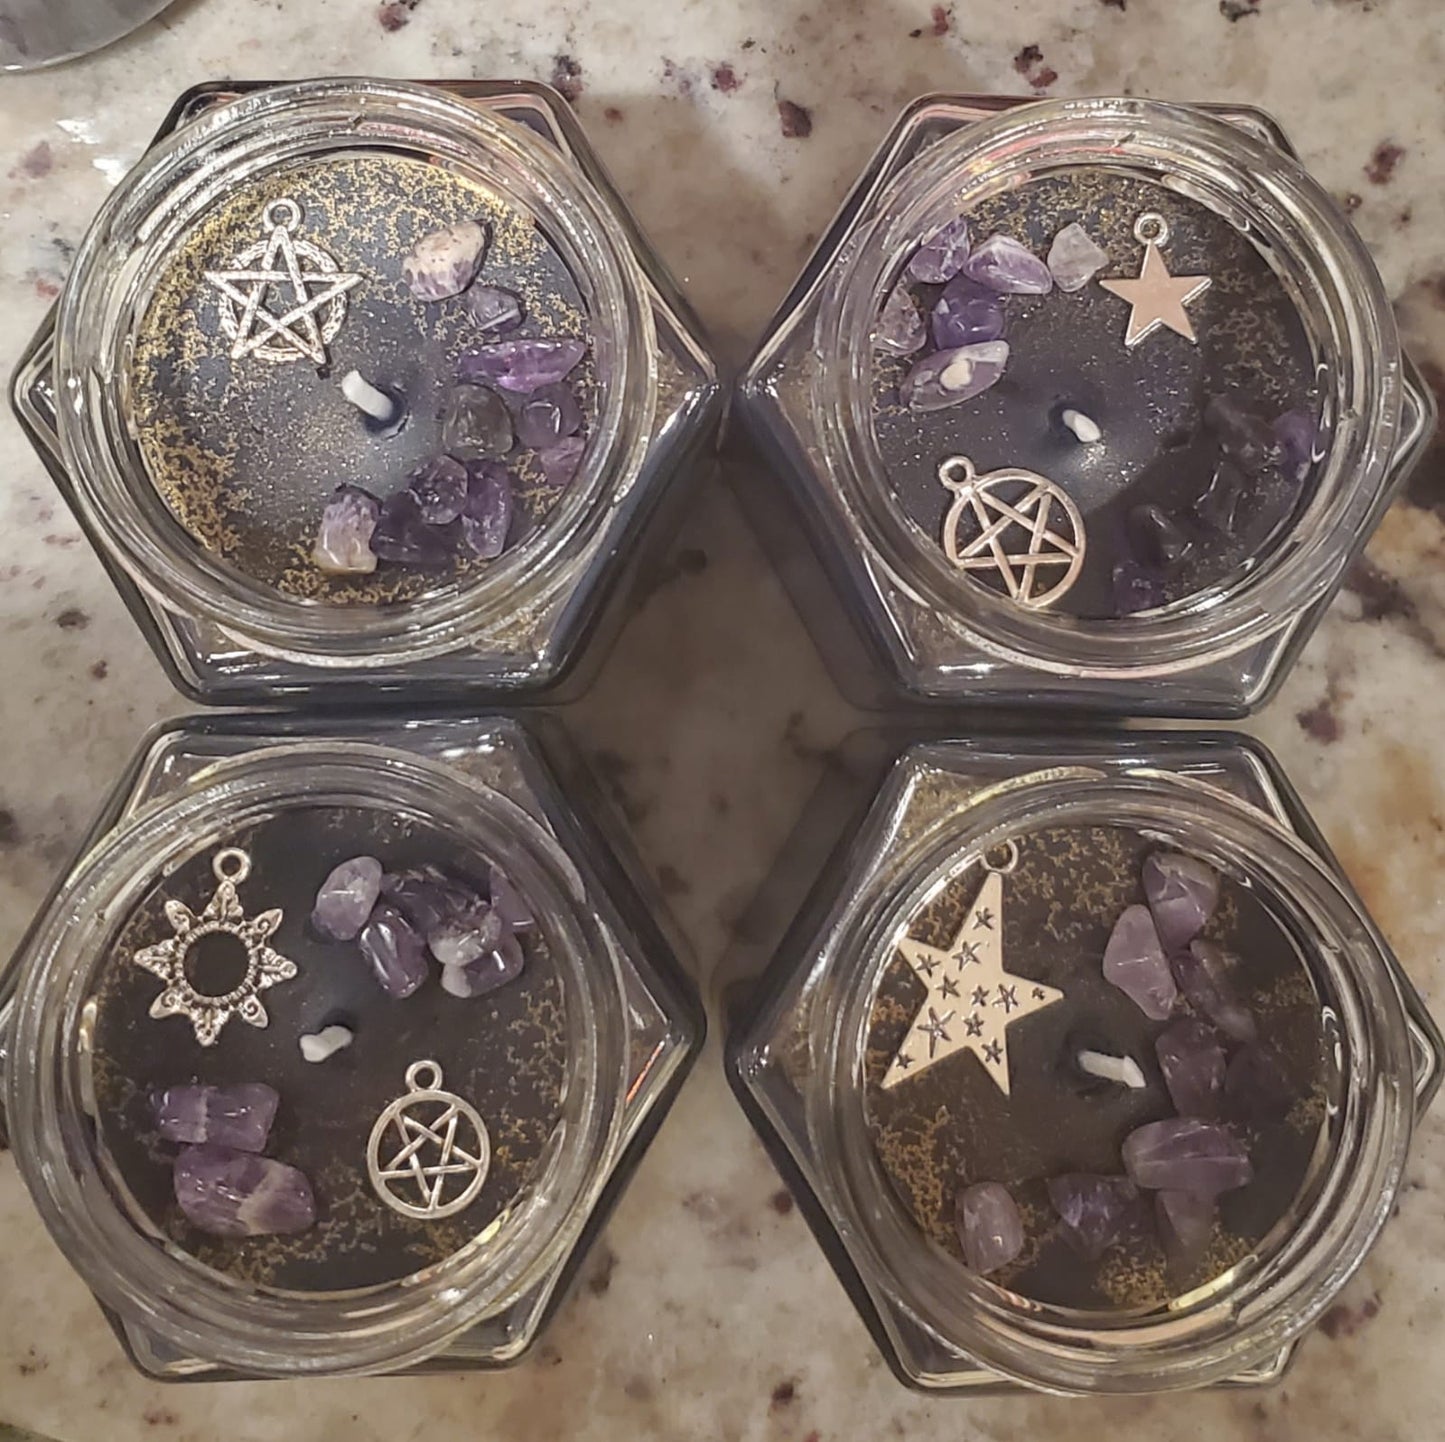 ARTEMISA (Witches Brew) SOY Candle with Amethyst Stones and Charm | Small Hex Jar